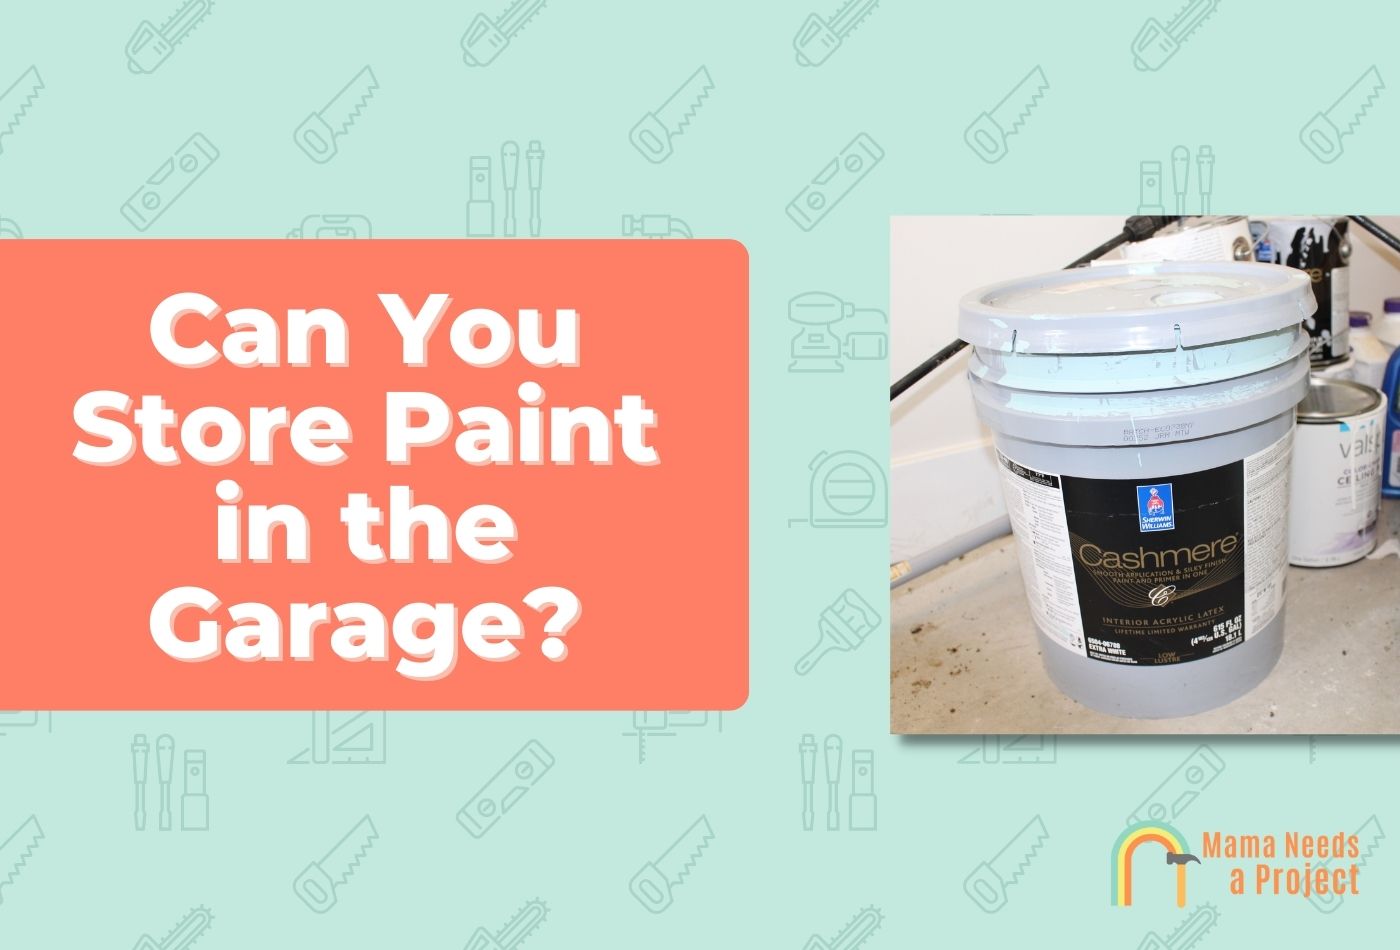 Can You Store Paint in the Garage